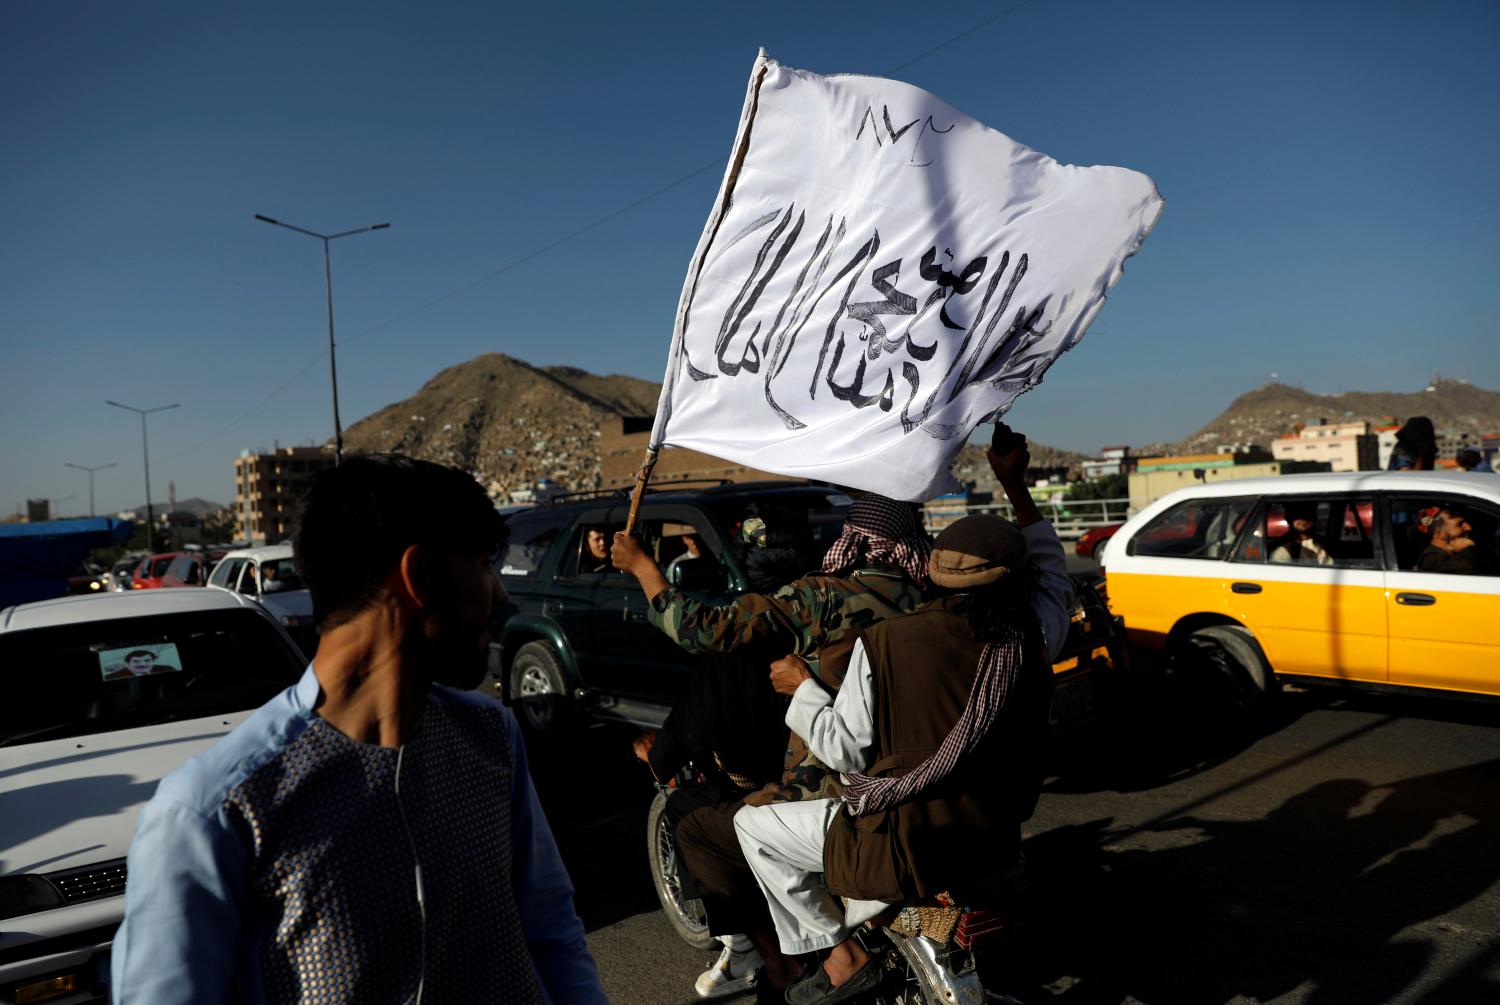 Taliban ride on a motorbike in Kabul, Afghanistan June 16, 2018. The writing on the flag reads: 'There is no god but Allah, Muhammad is the messenger of Allah'. REUTERS/Mohammad Ismail